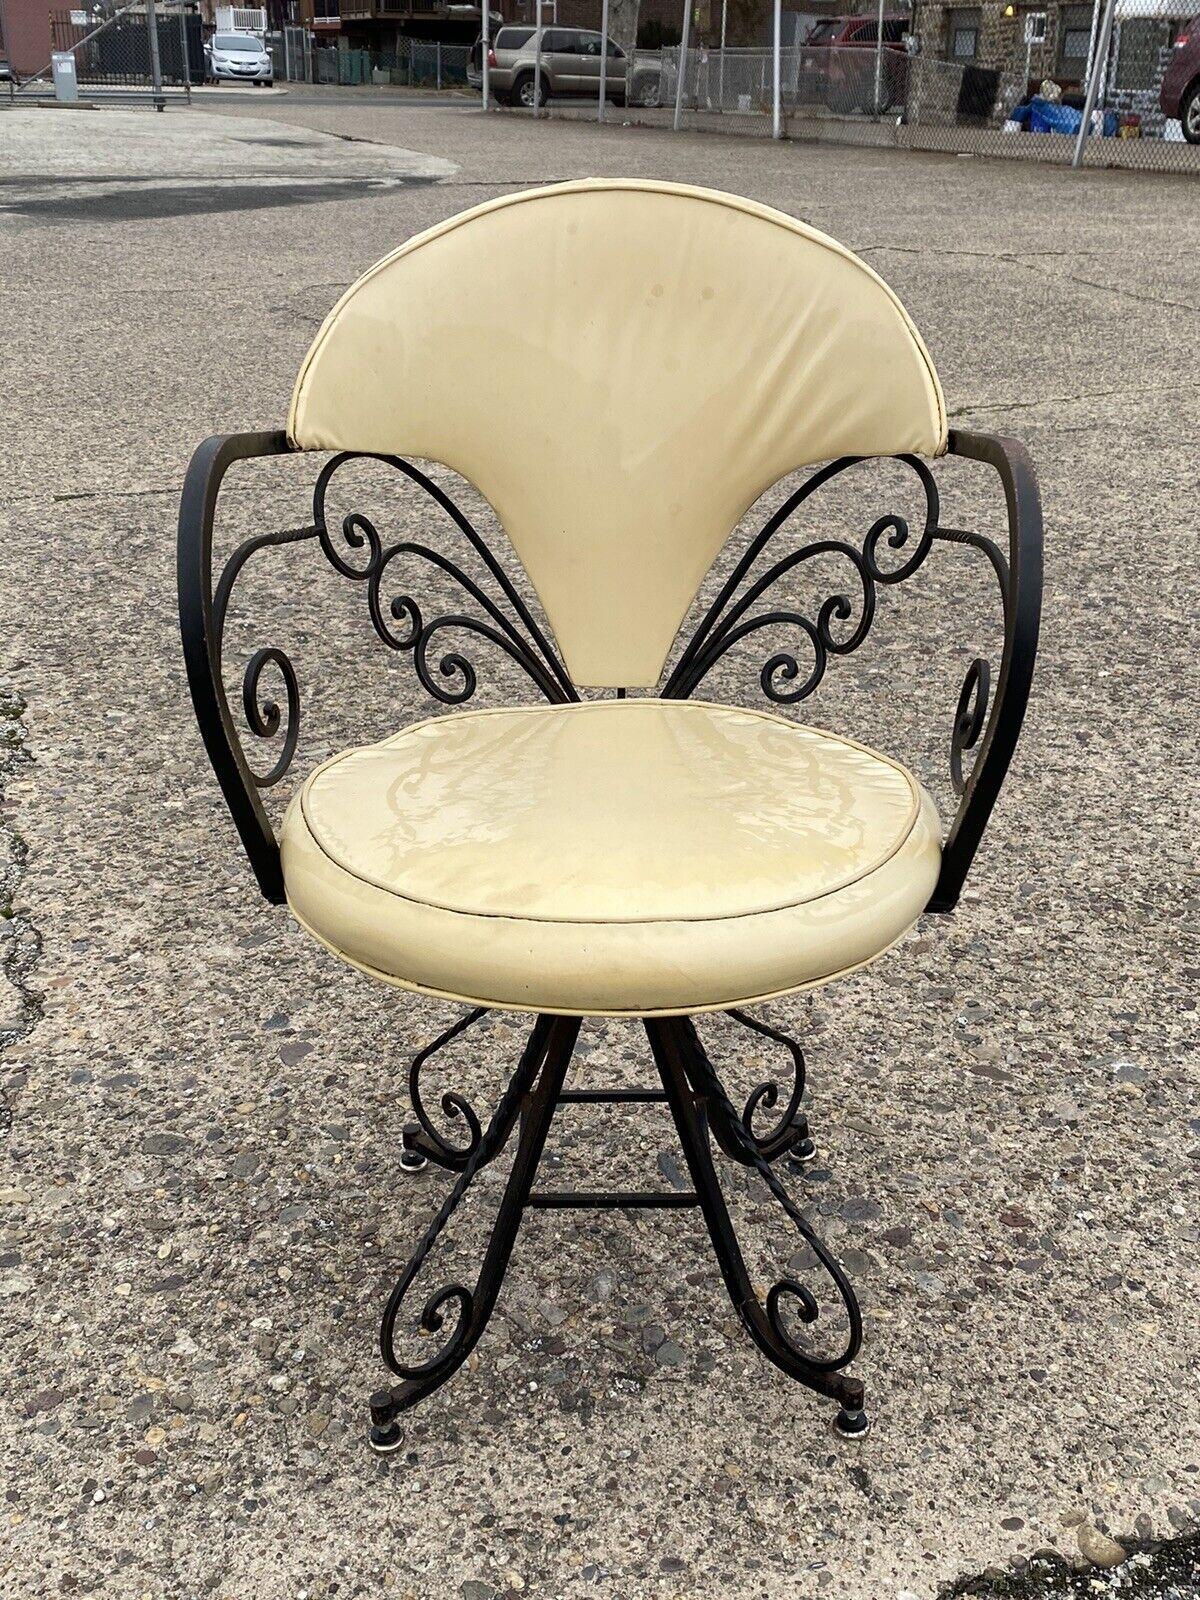 Vintage Hollywood Regency Wrought Iron Butterfly Swivel Club Chairs, Set of 4 In Good Condition For Sale In Philadelphia, PA